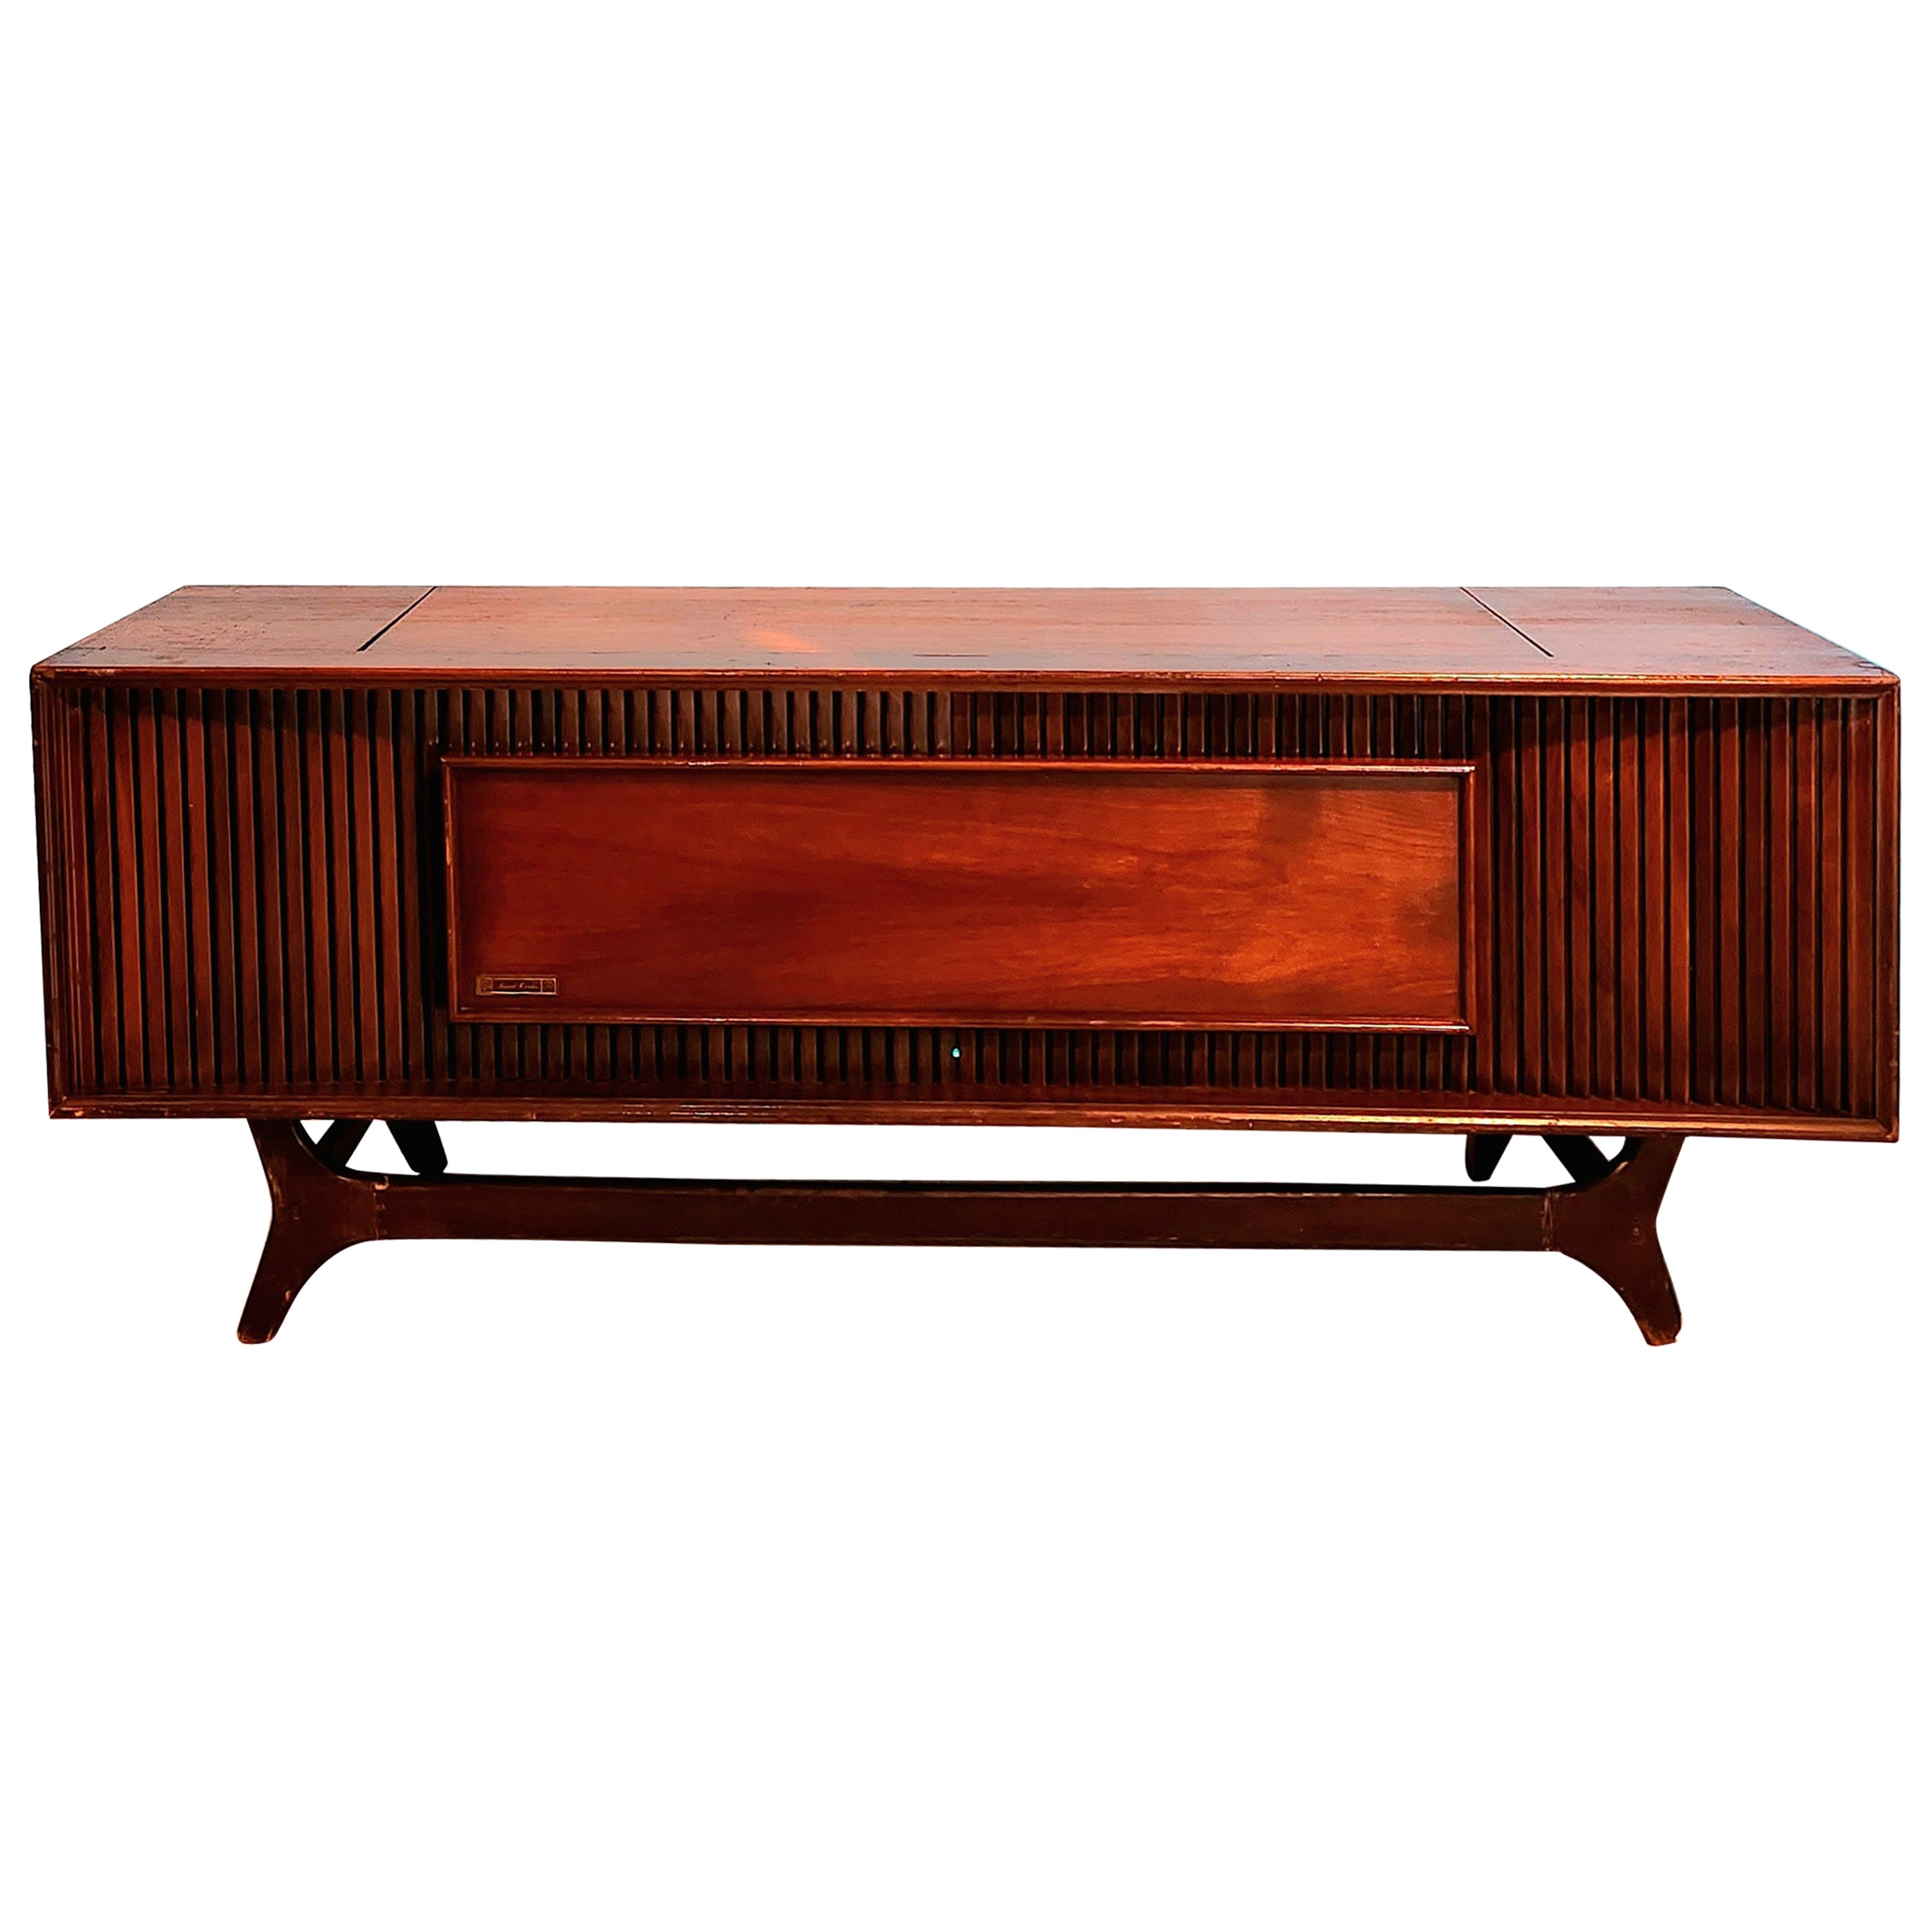 Mid-Century Modern Stereo Console Bar Ge Record Player Refurbed Bluetooth